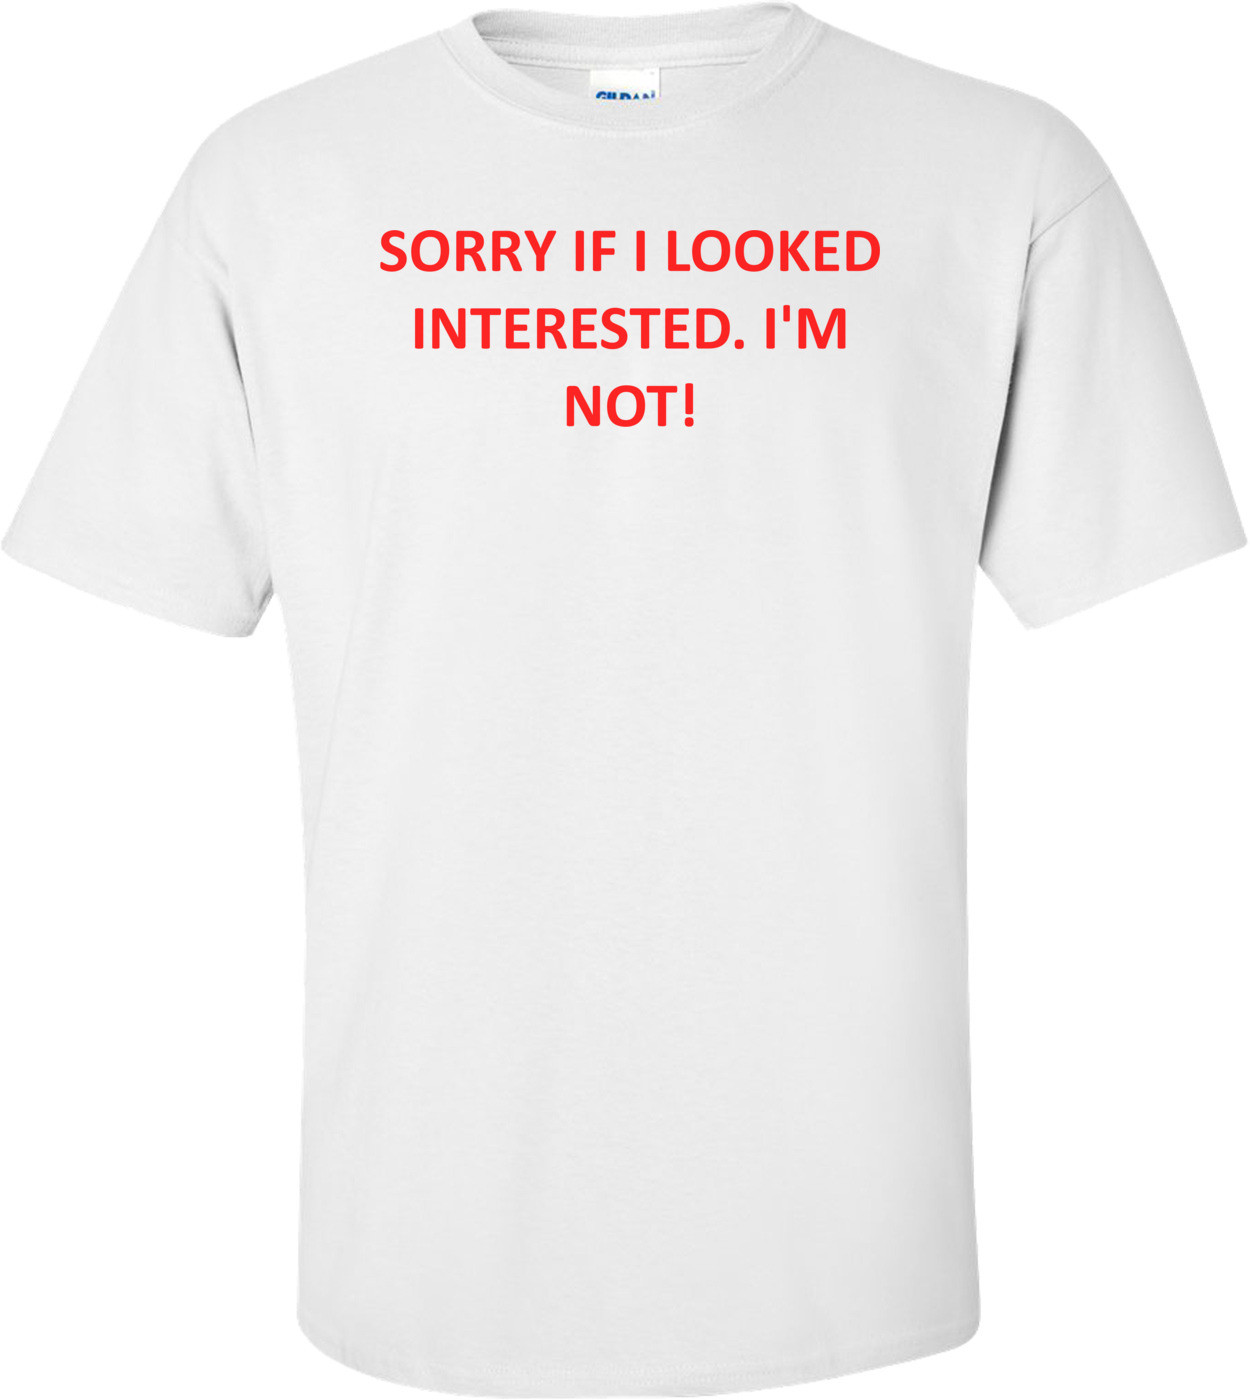 SORRY IF I LOOKED INTERESTED. I'M NOT! Shirt